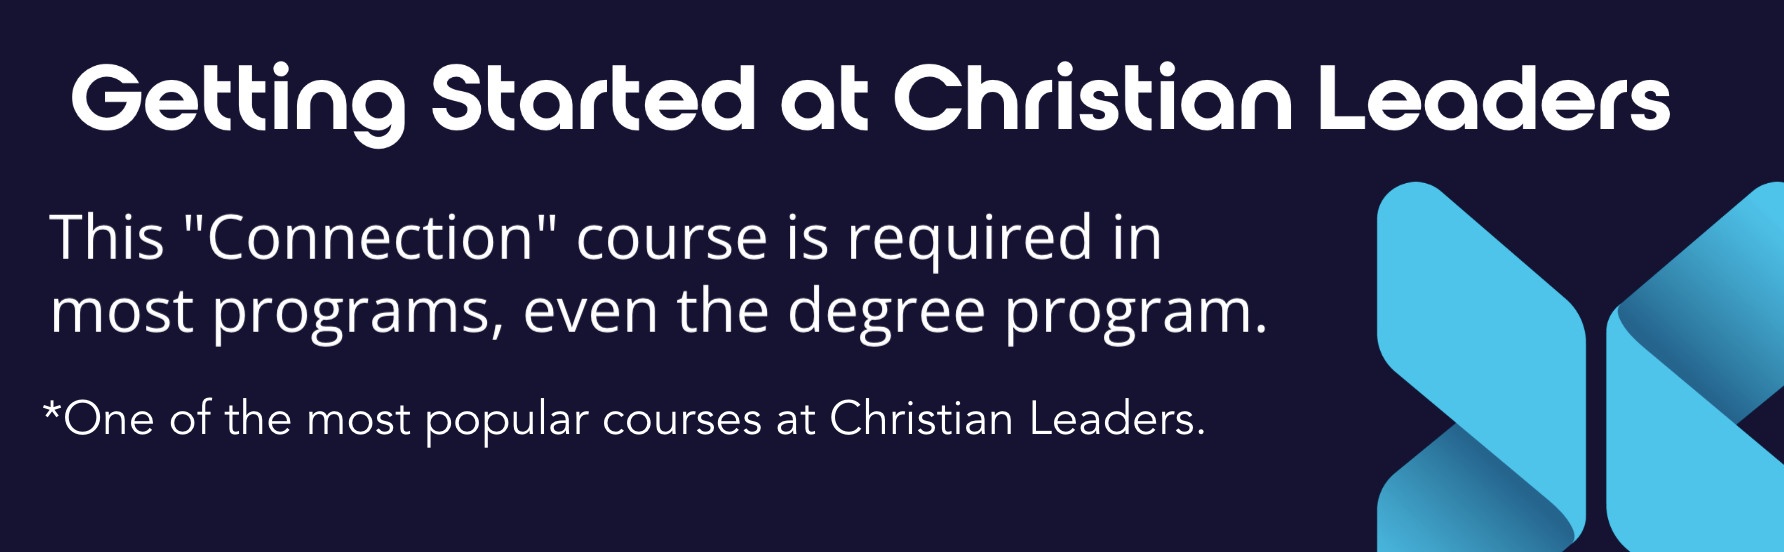 Christian Leaders Connection Course Top Banner